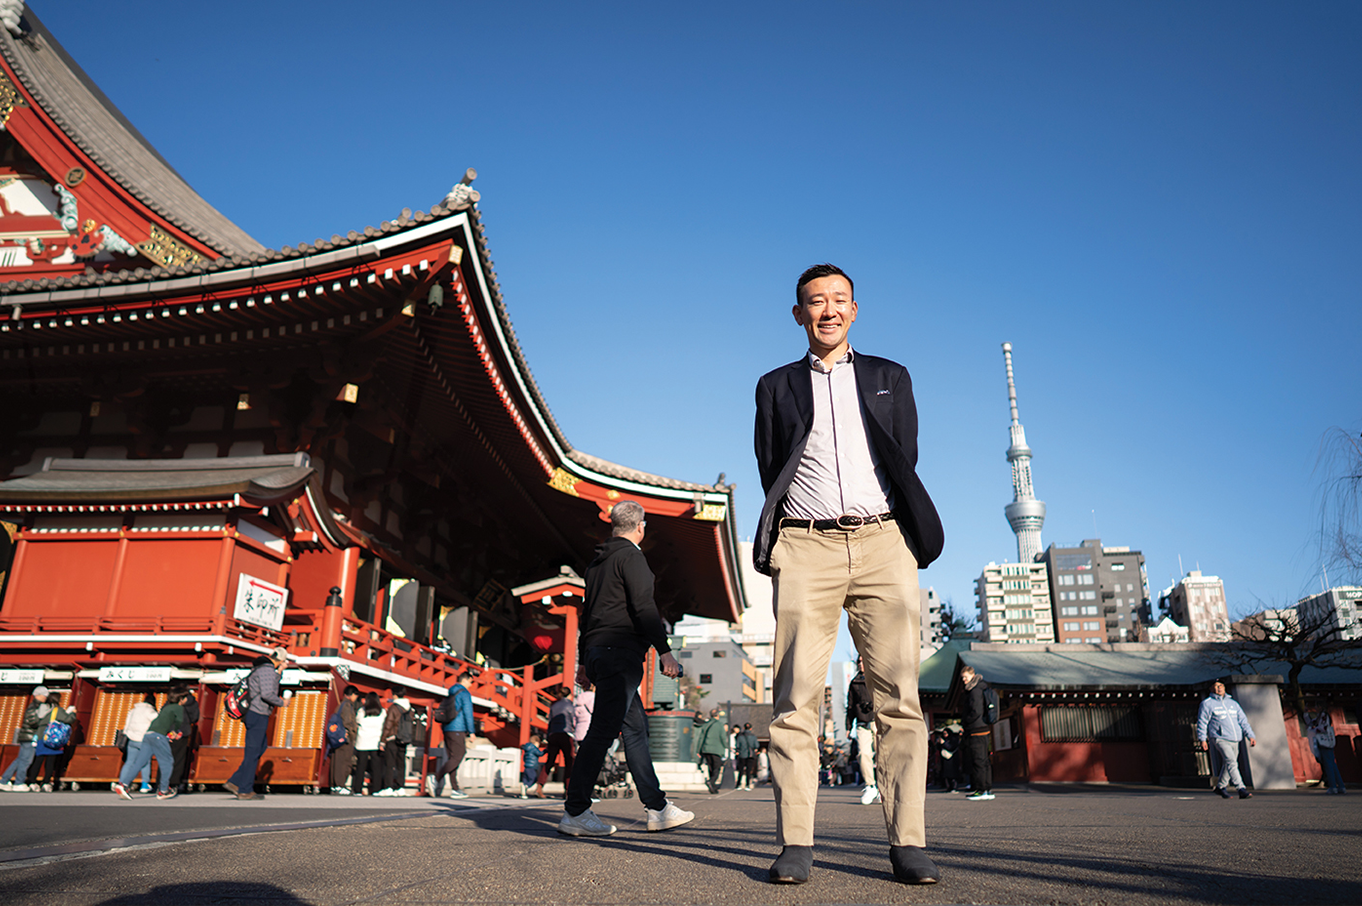 Maison ROCOCO Corporation Founder and CEO Yohay Wakabayashi poses for a photograph in at Sensoji Temple on Wednesday, Feb. 28, 2023 in Tokyo. (